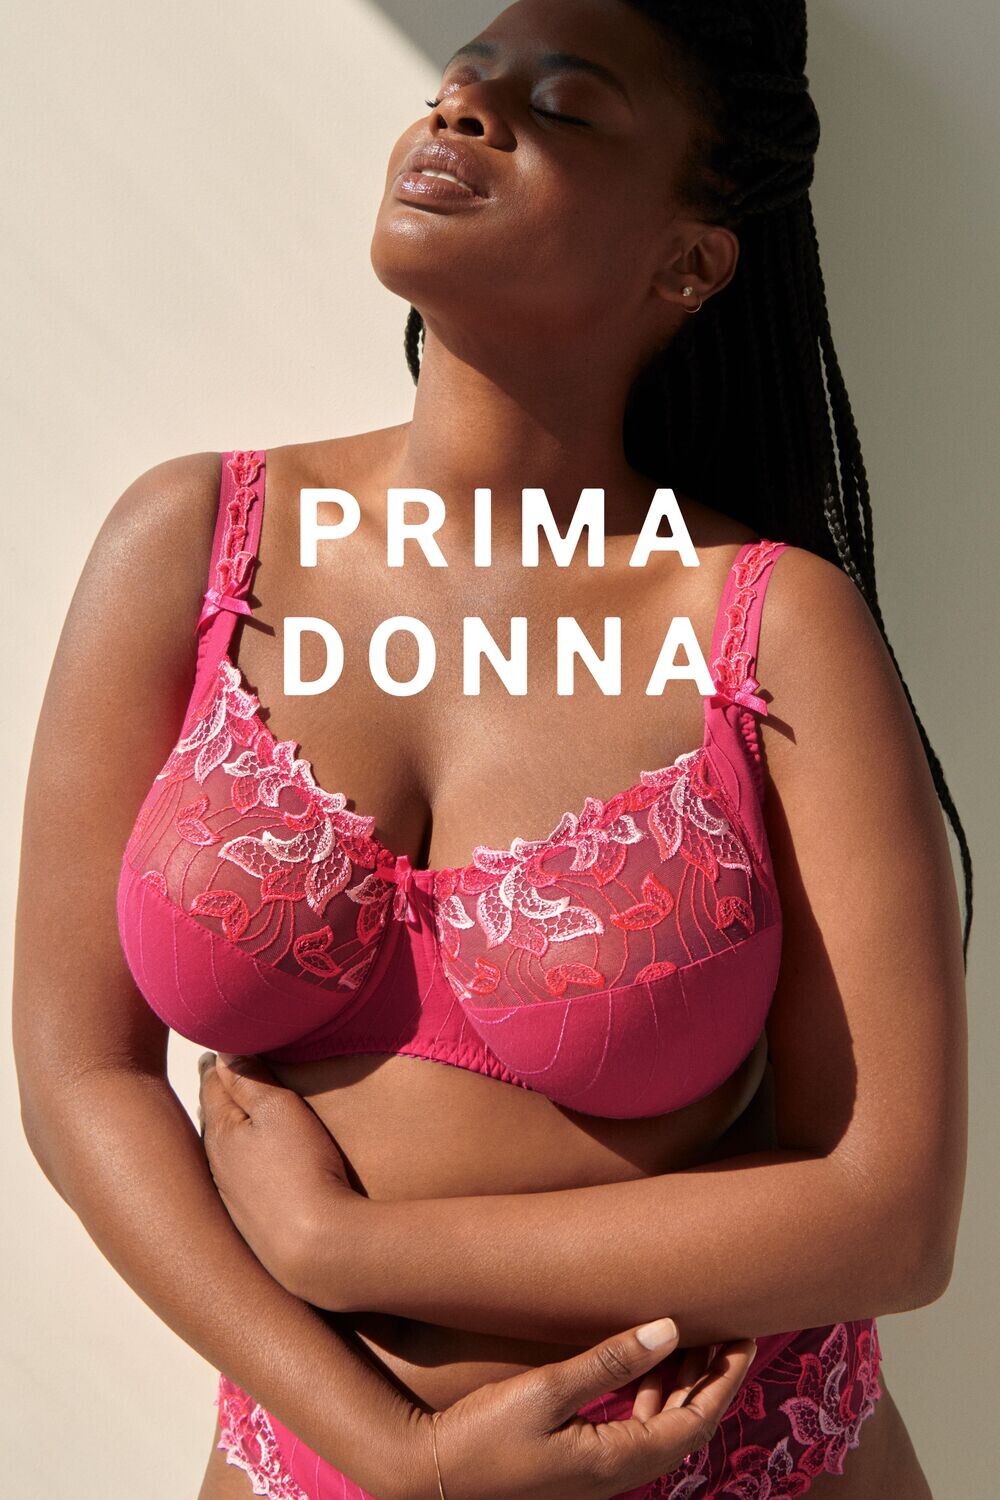 Prima Donna Beugel BH: Deauville, Amour, Europese Maten